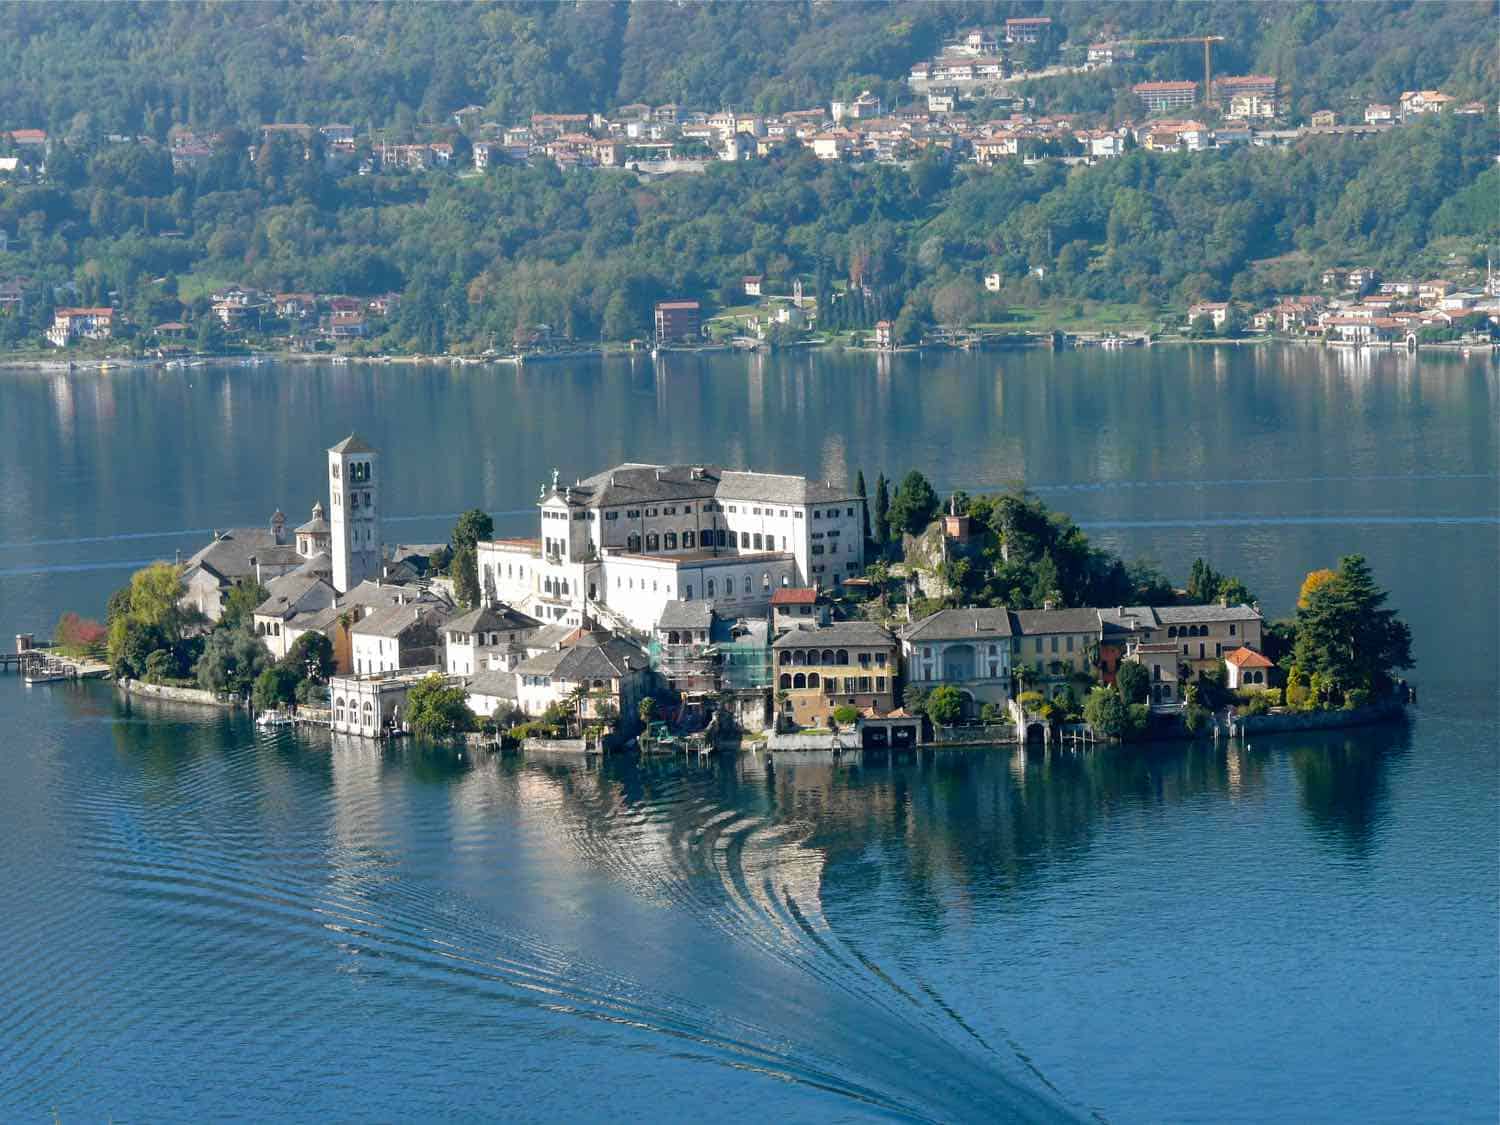 Island with historic buildings in the middle of a lake in Italy